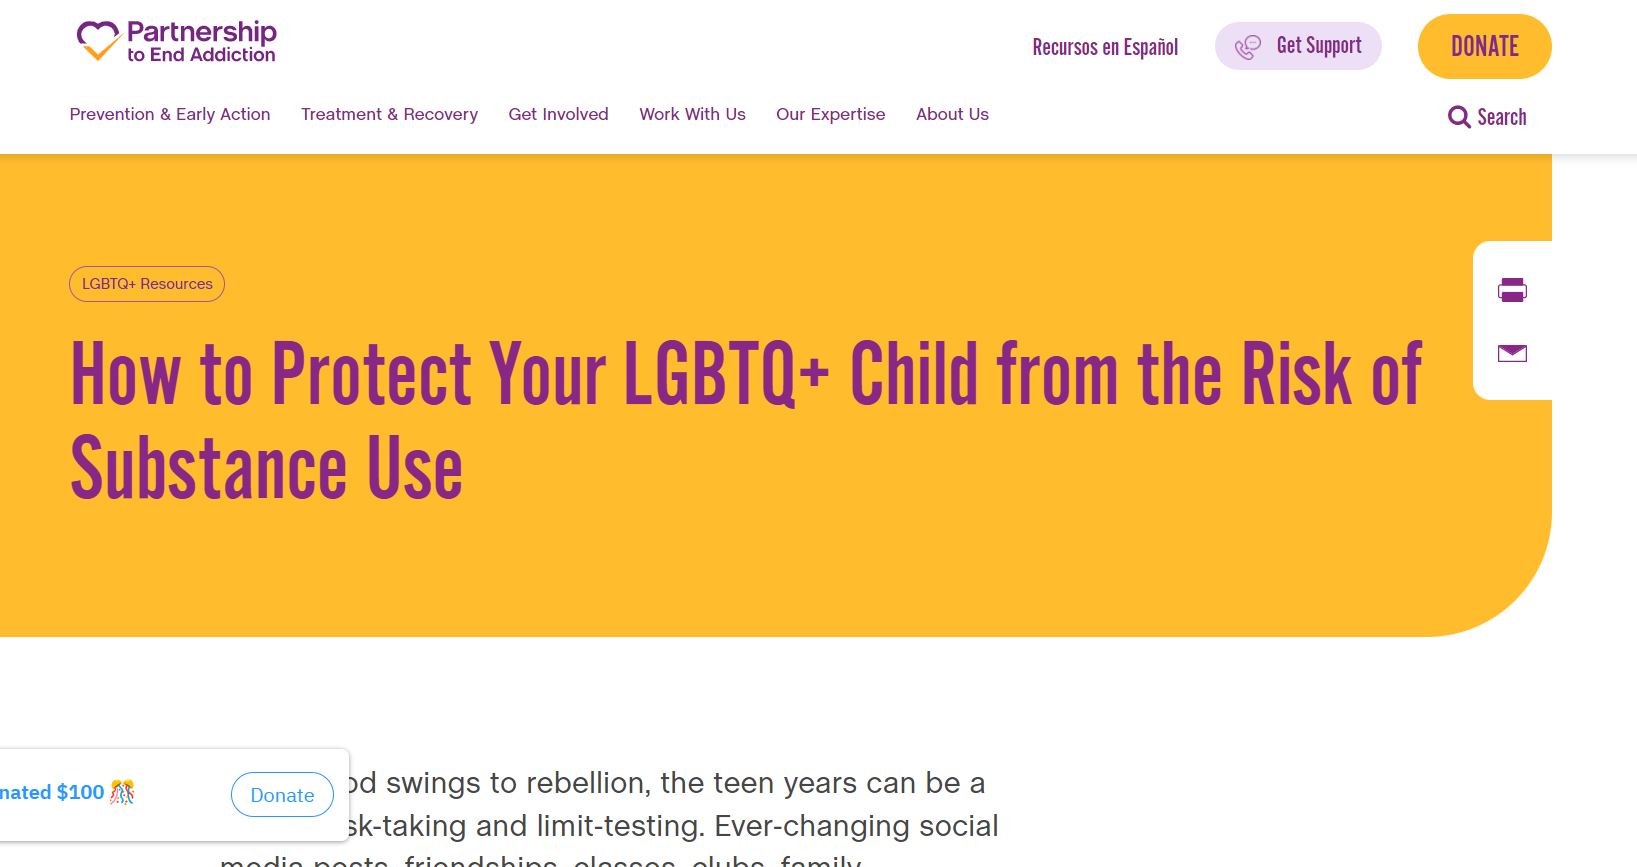 Partnership to End Addiction: How to Protect Your LGBTQ+ Child from the Risk of Substance Use